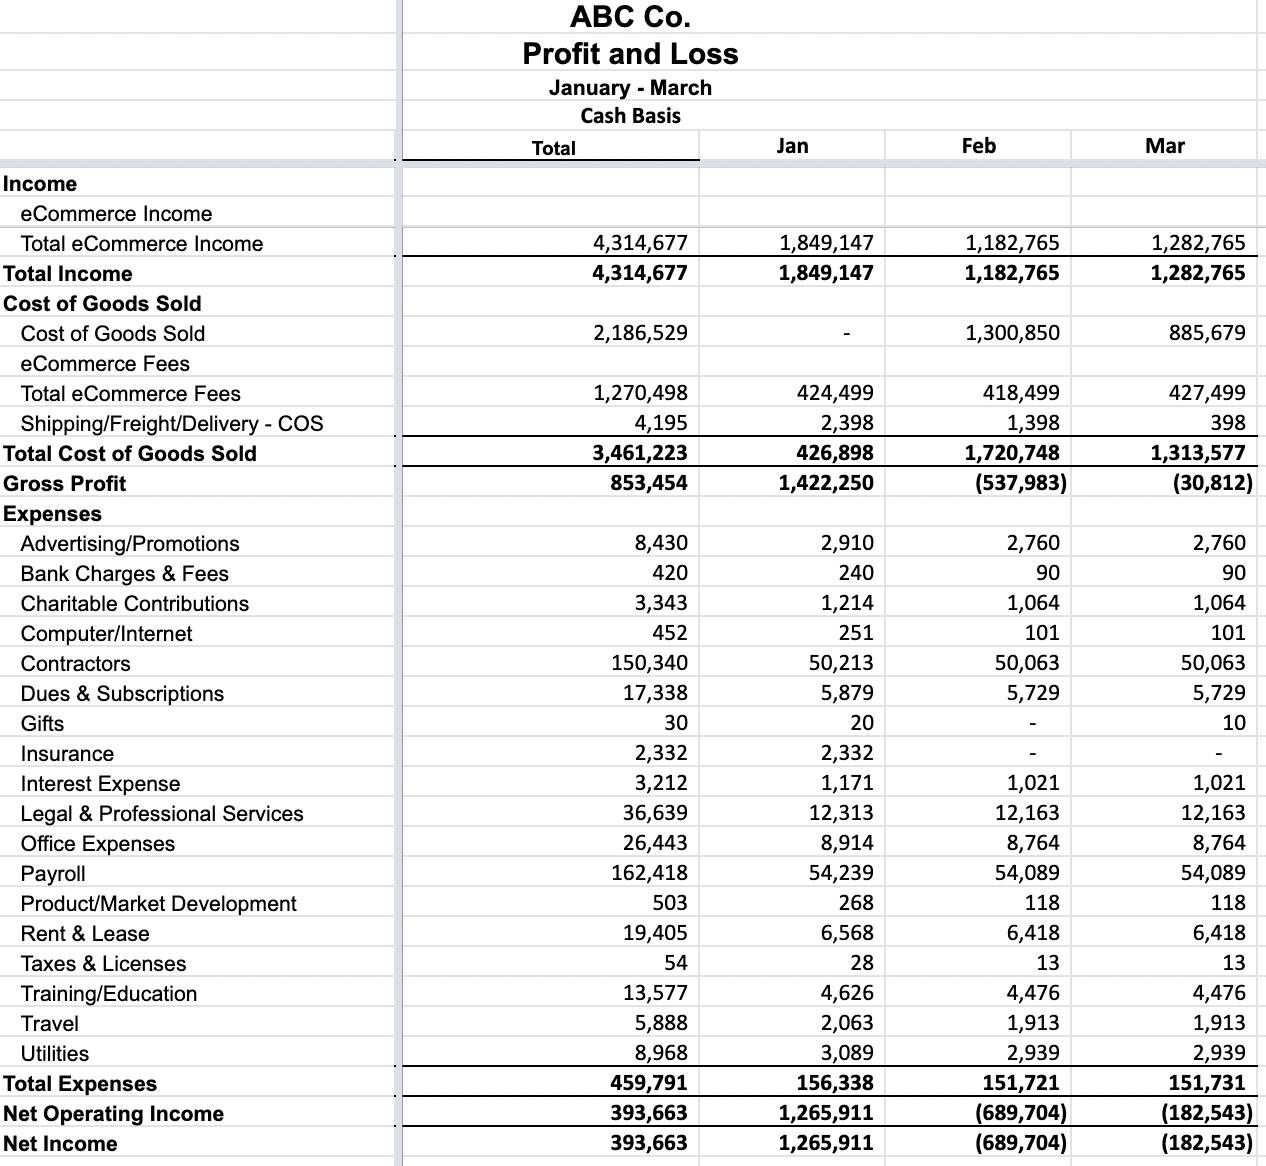 example of a profit and loss statement using cash basis